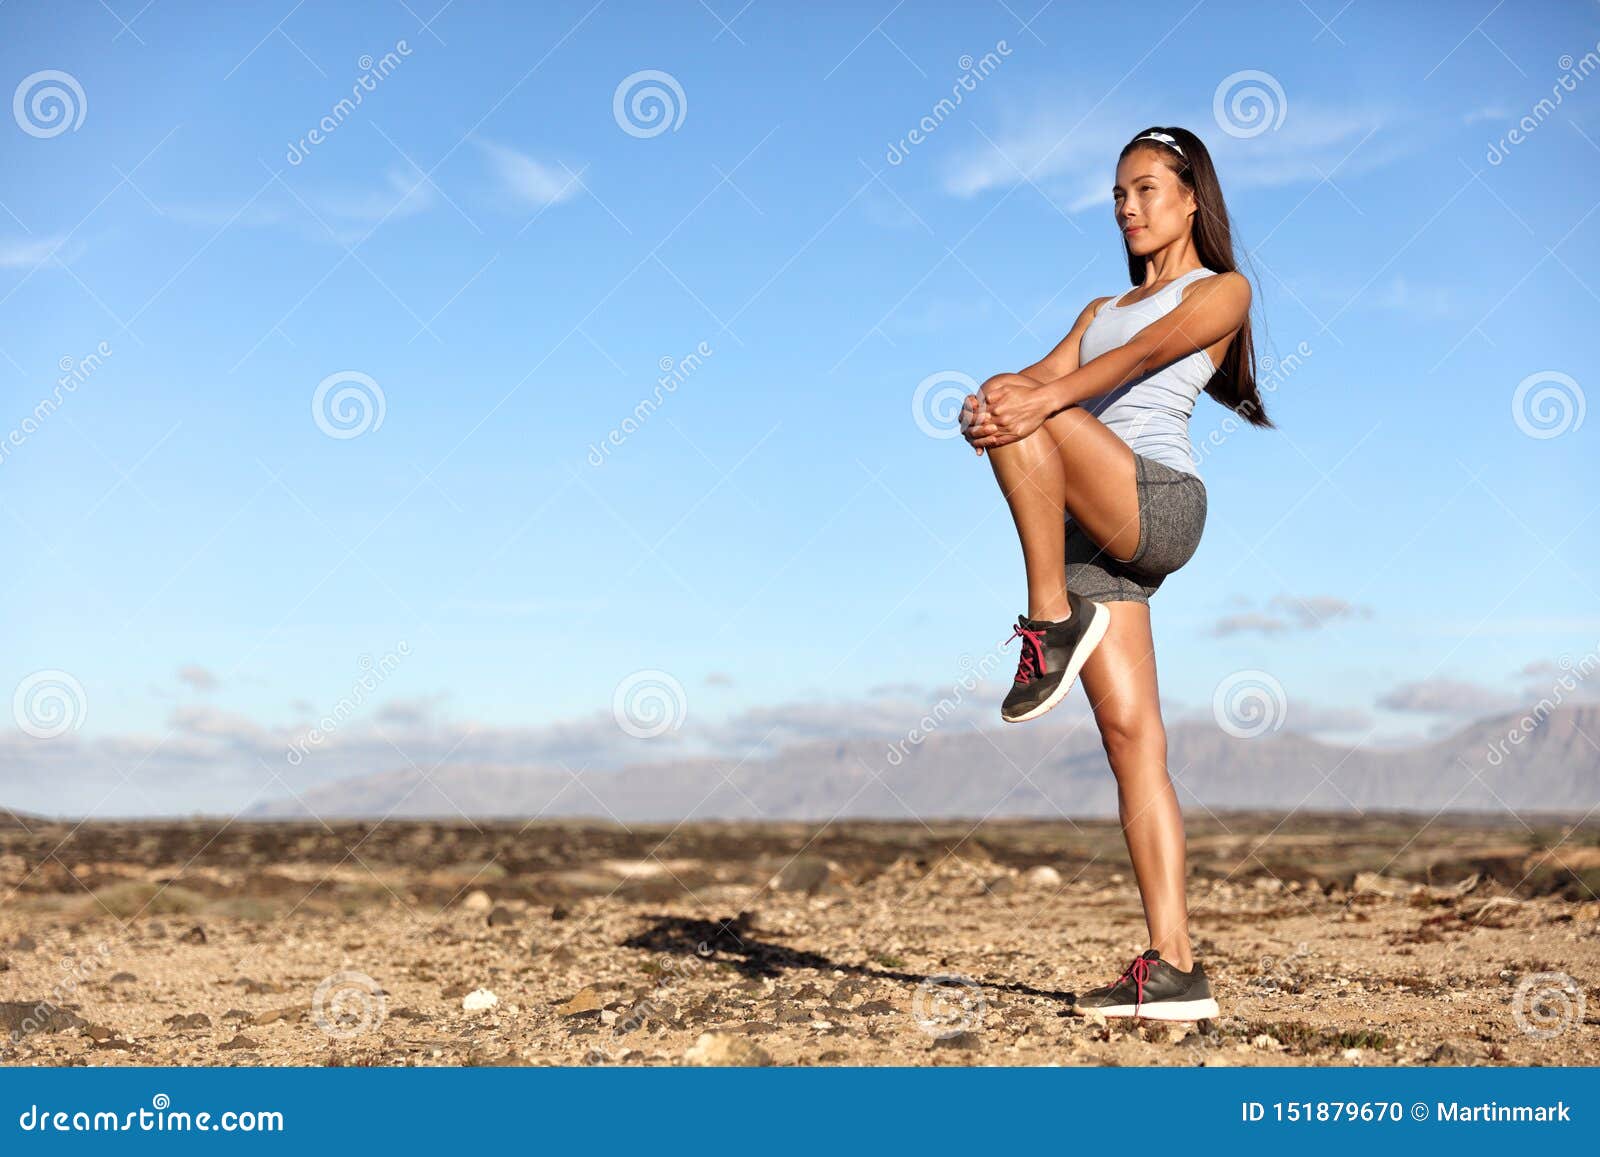 Standing Glutes Leg Stretch Fitness Woman Workout Stock Photo